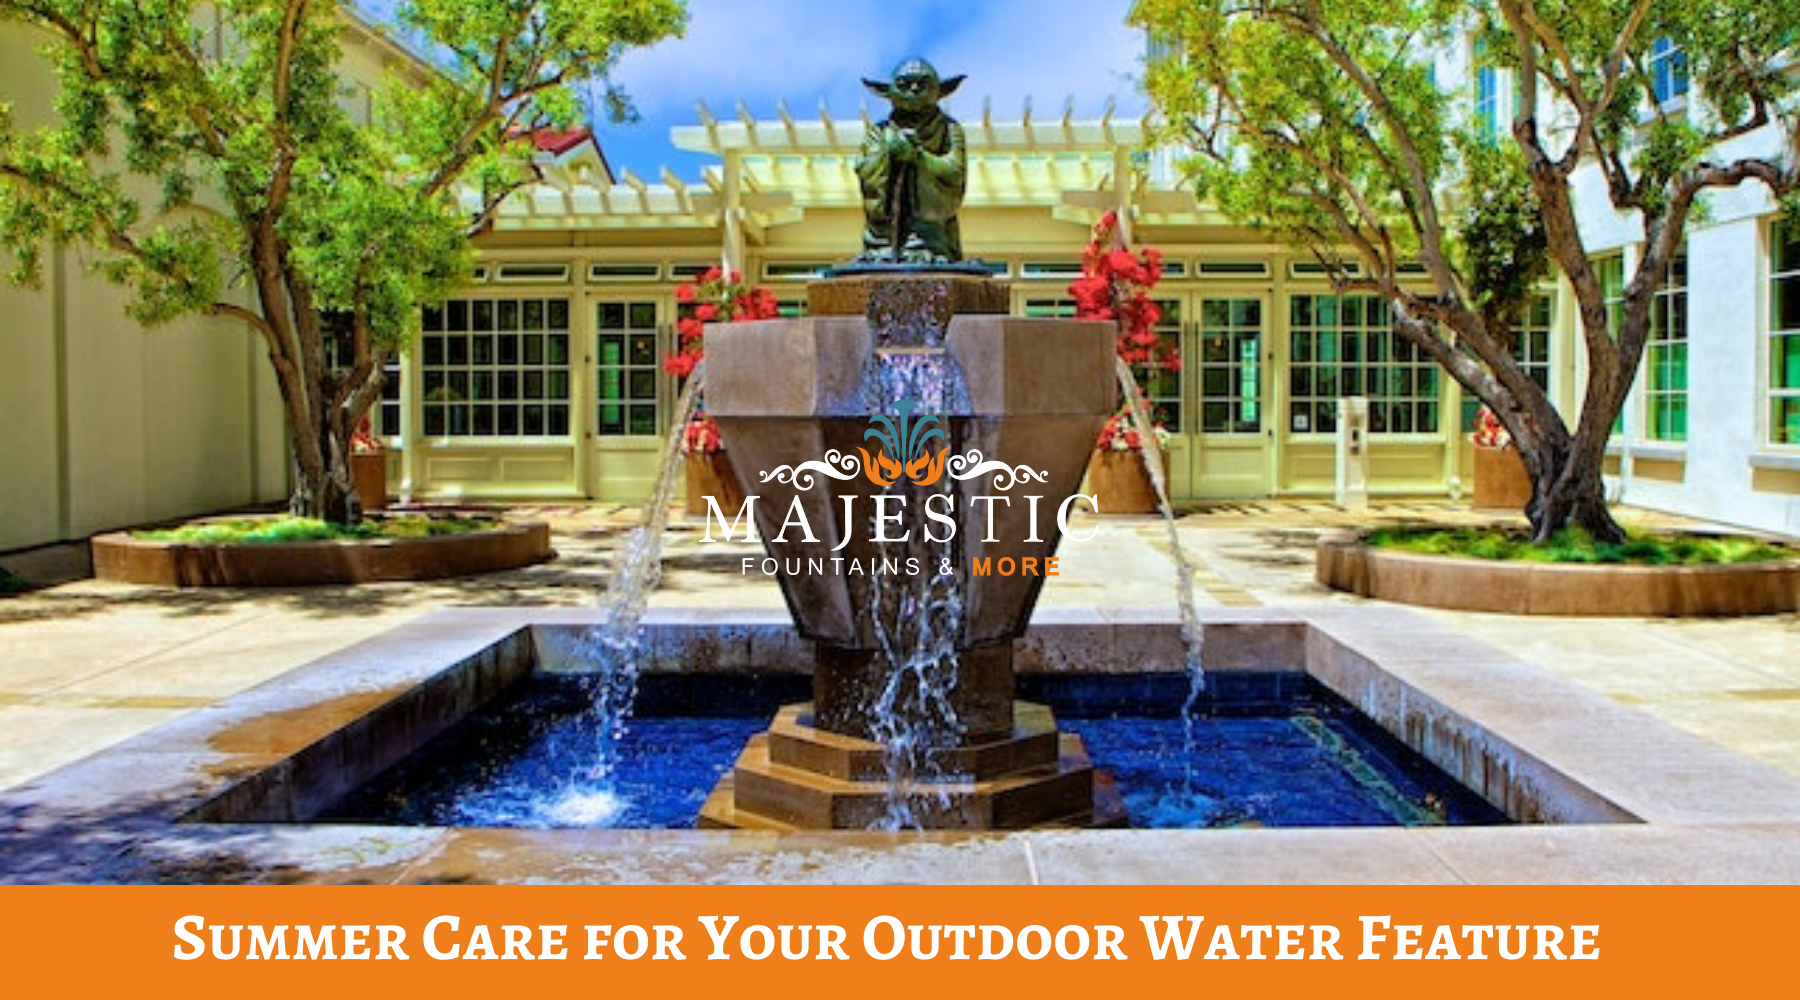 Summer Care for Your Outdoor Water Feature